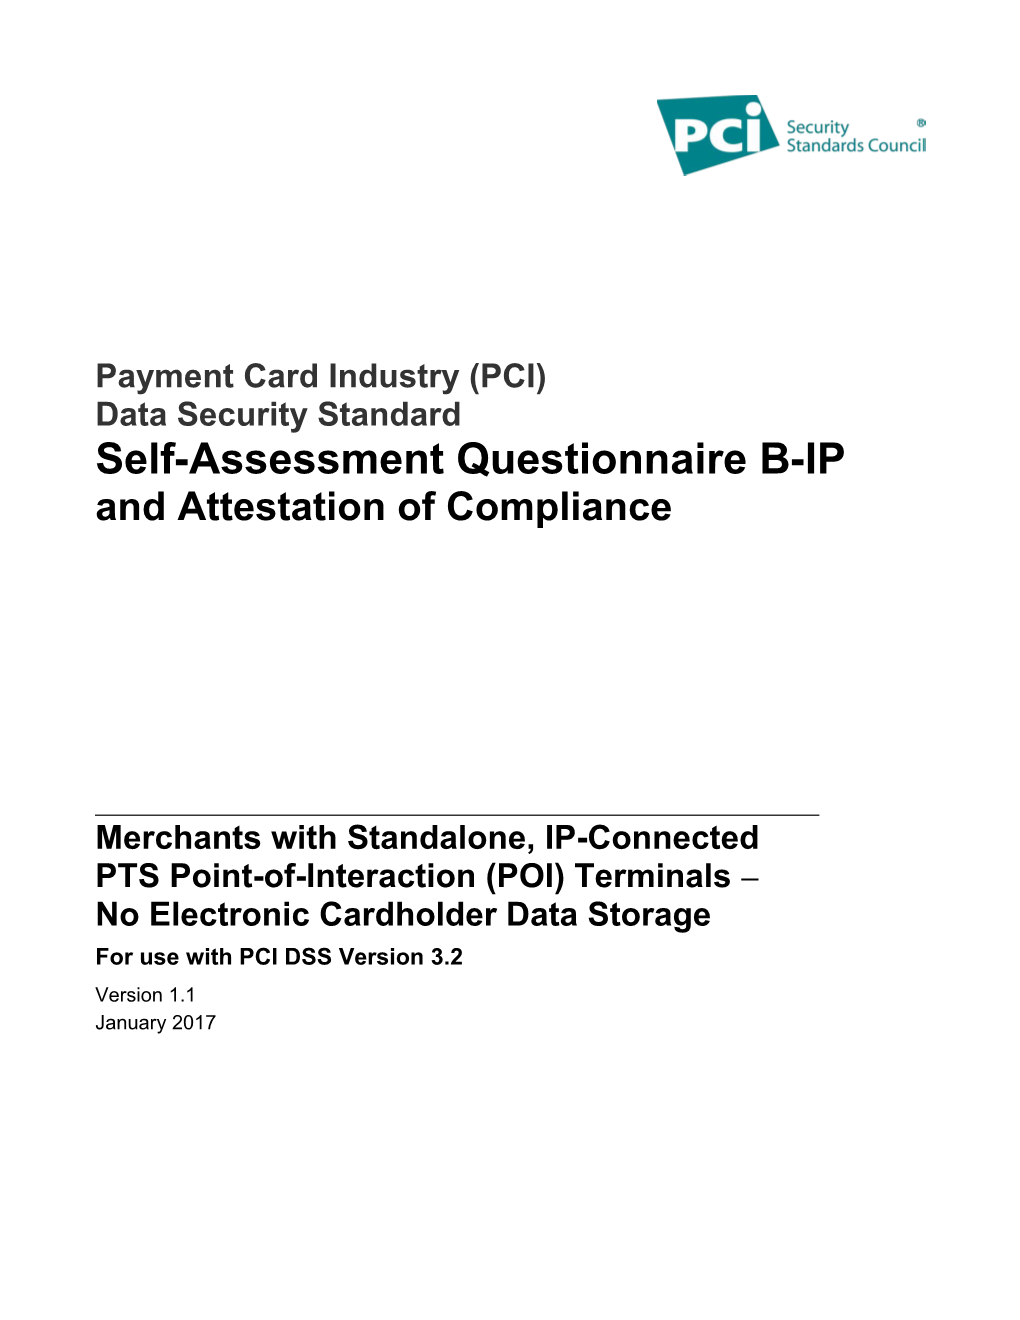 For Use with PCI DSS Version3.2